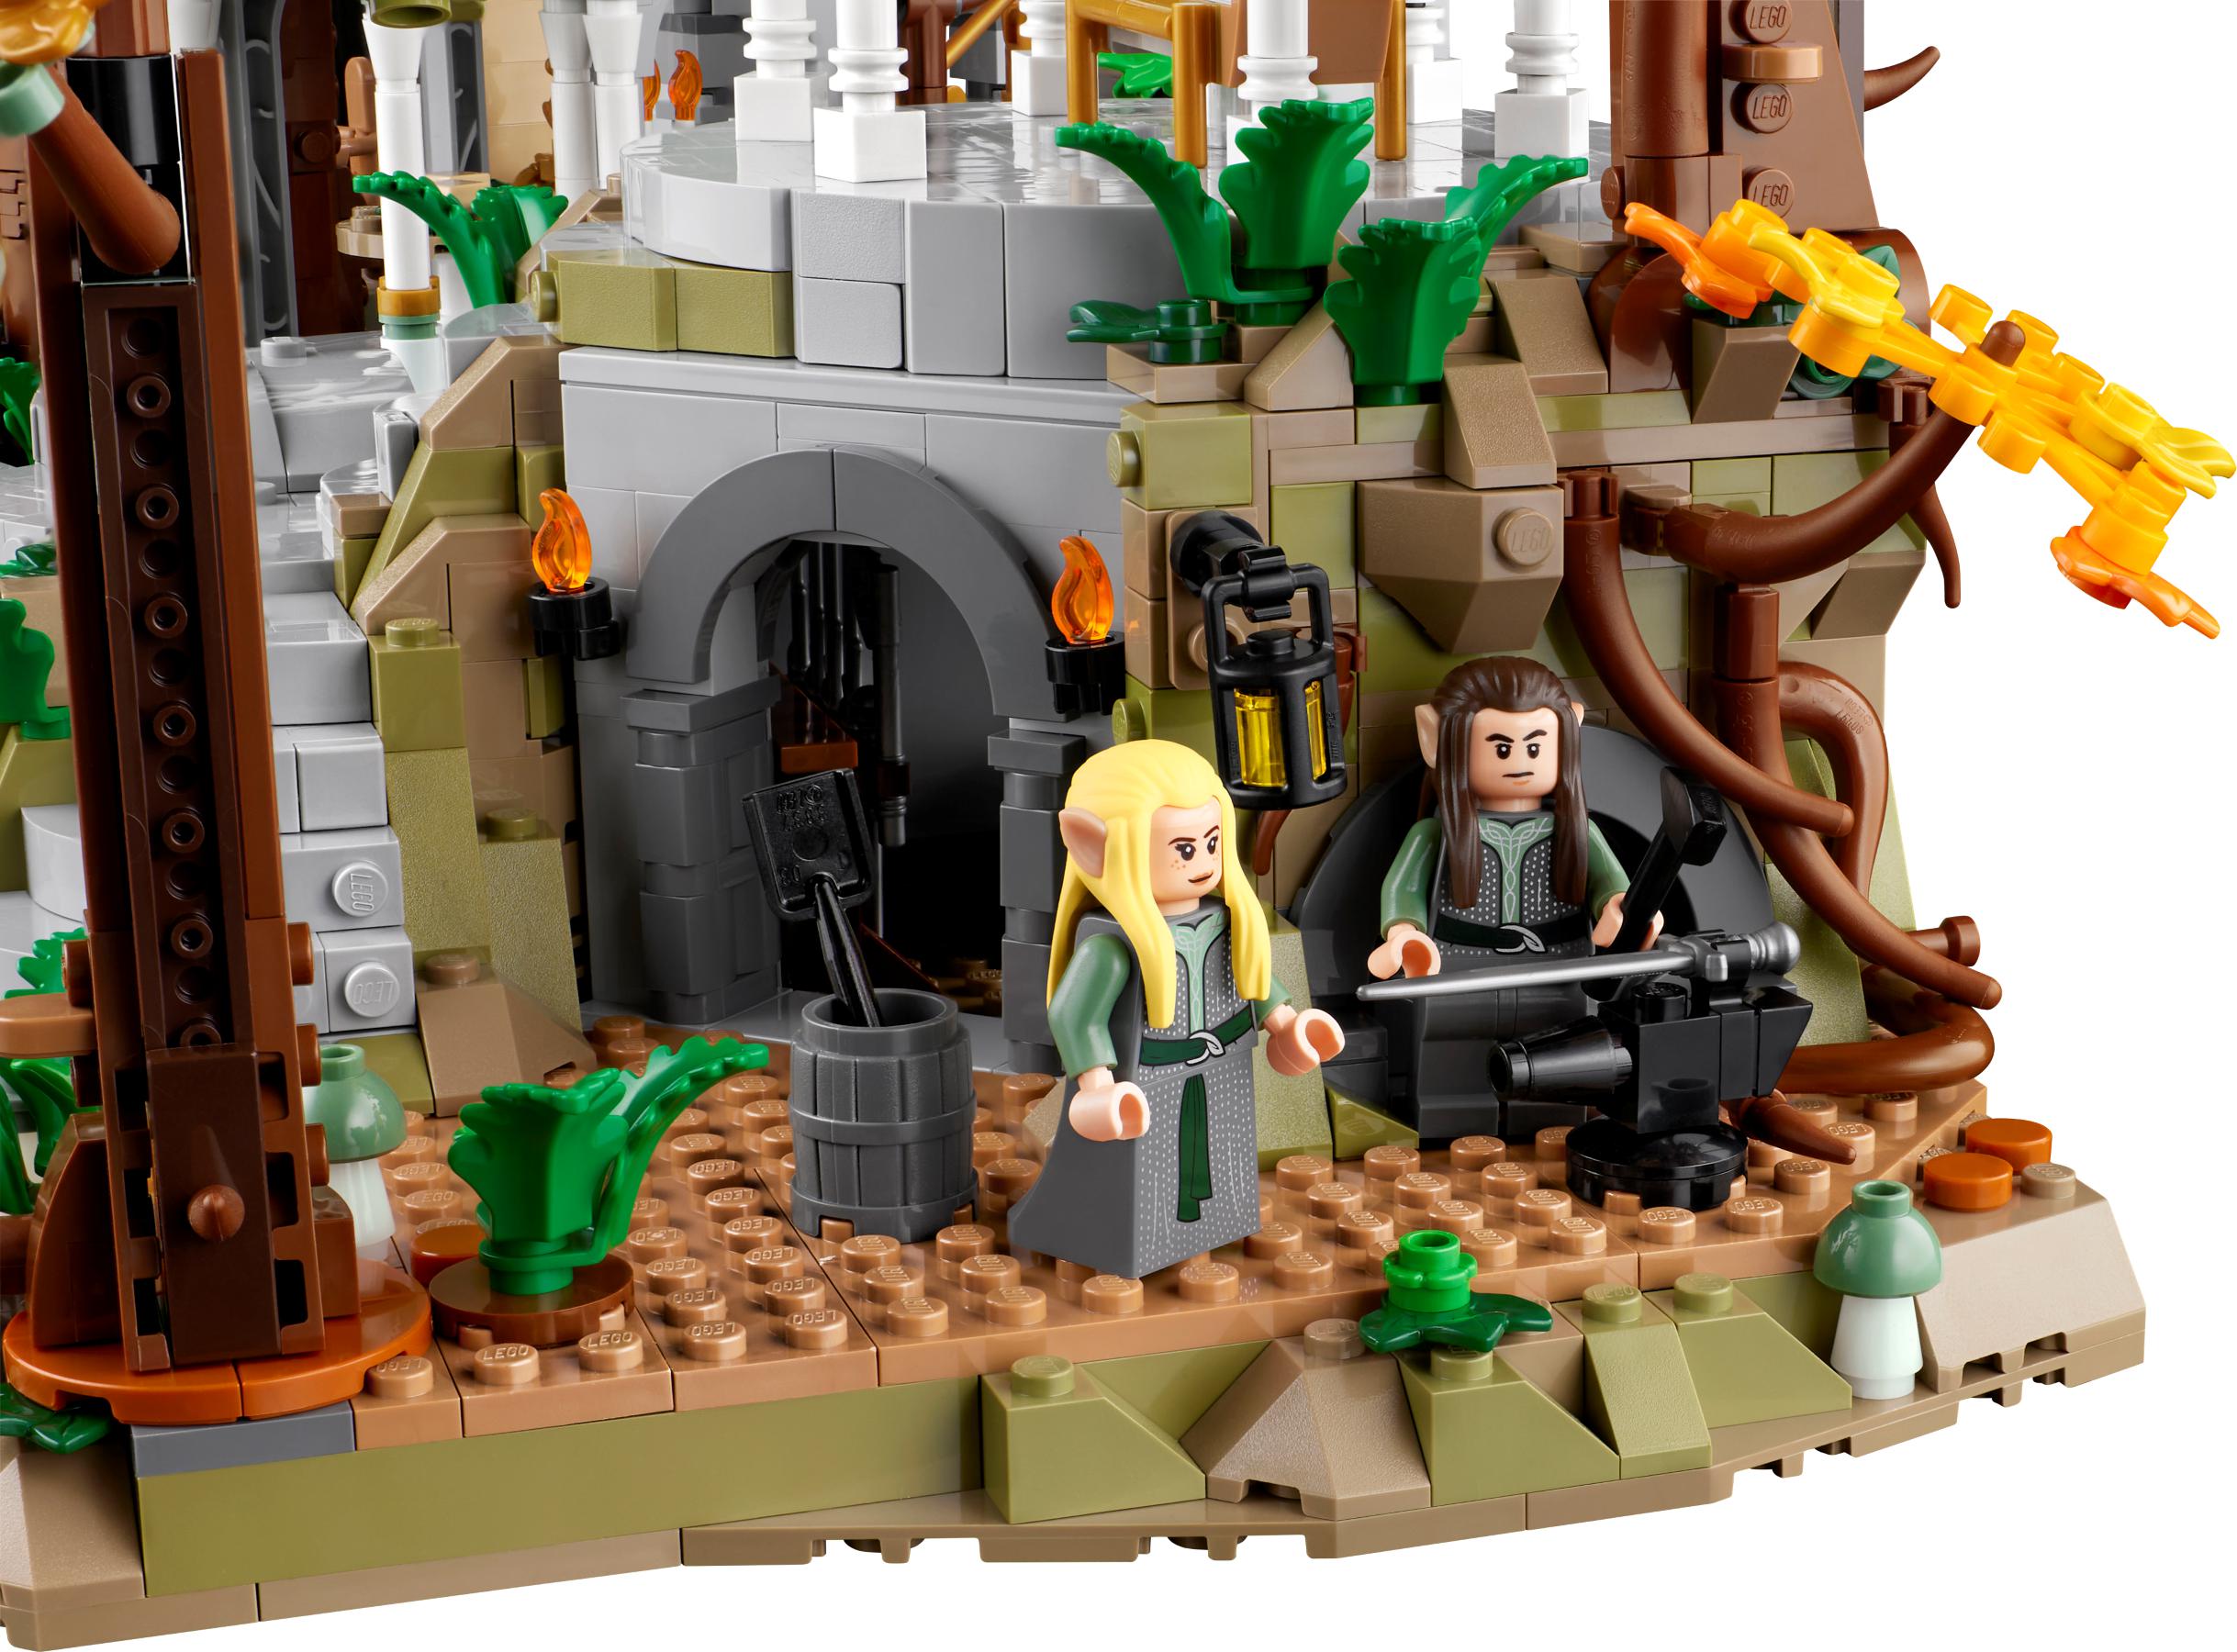 lego lord of the rings logo